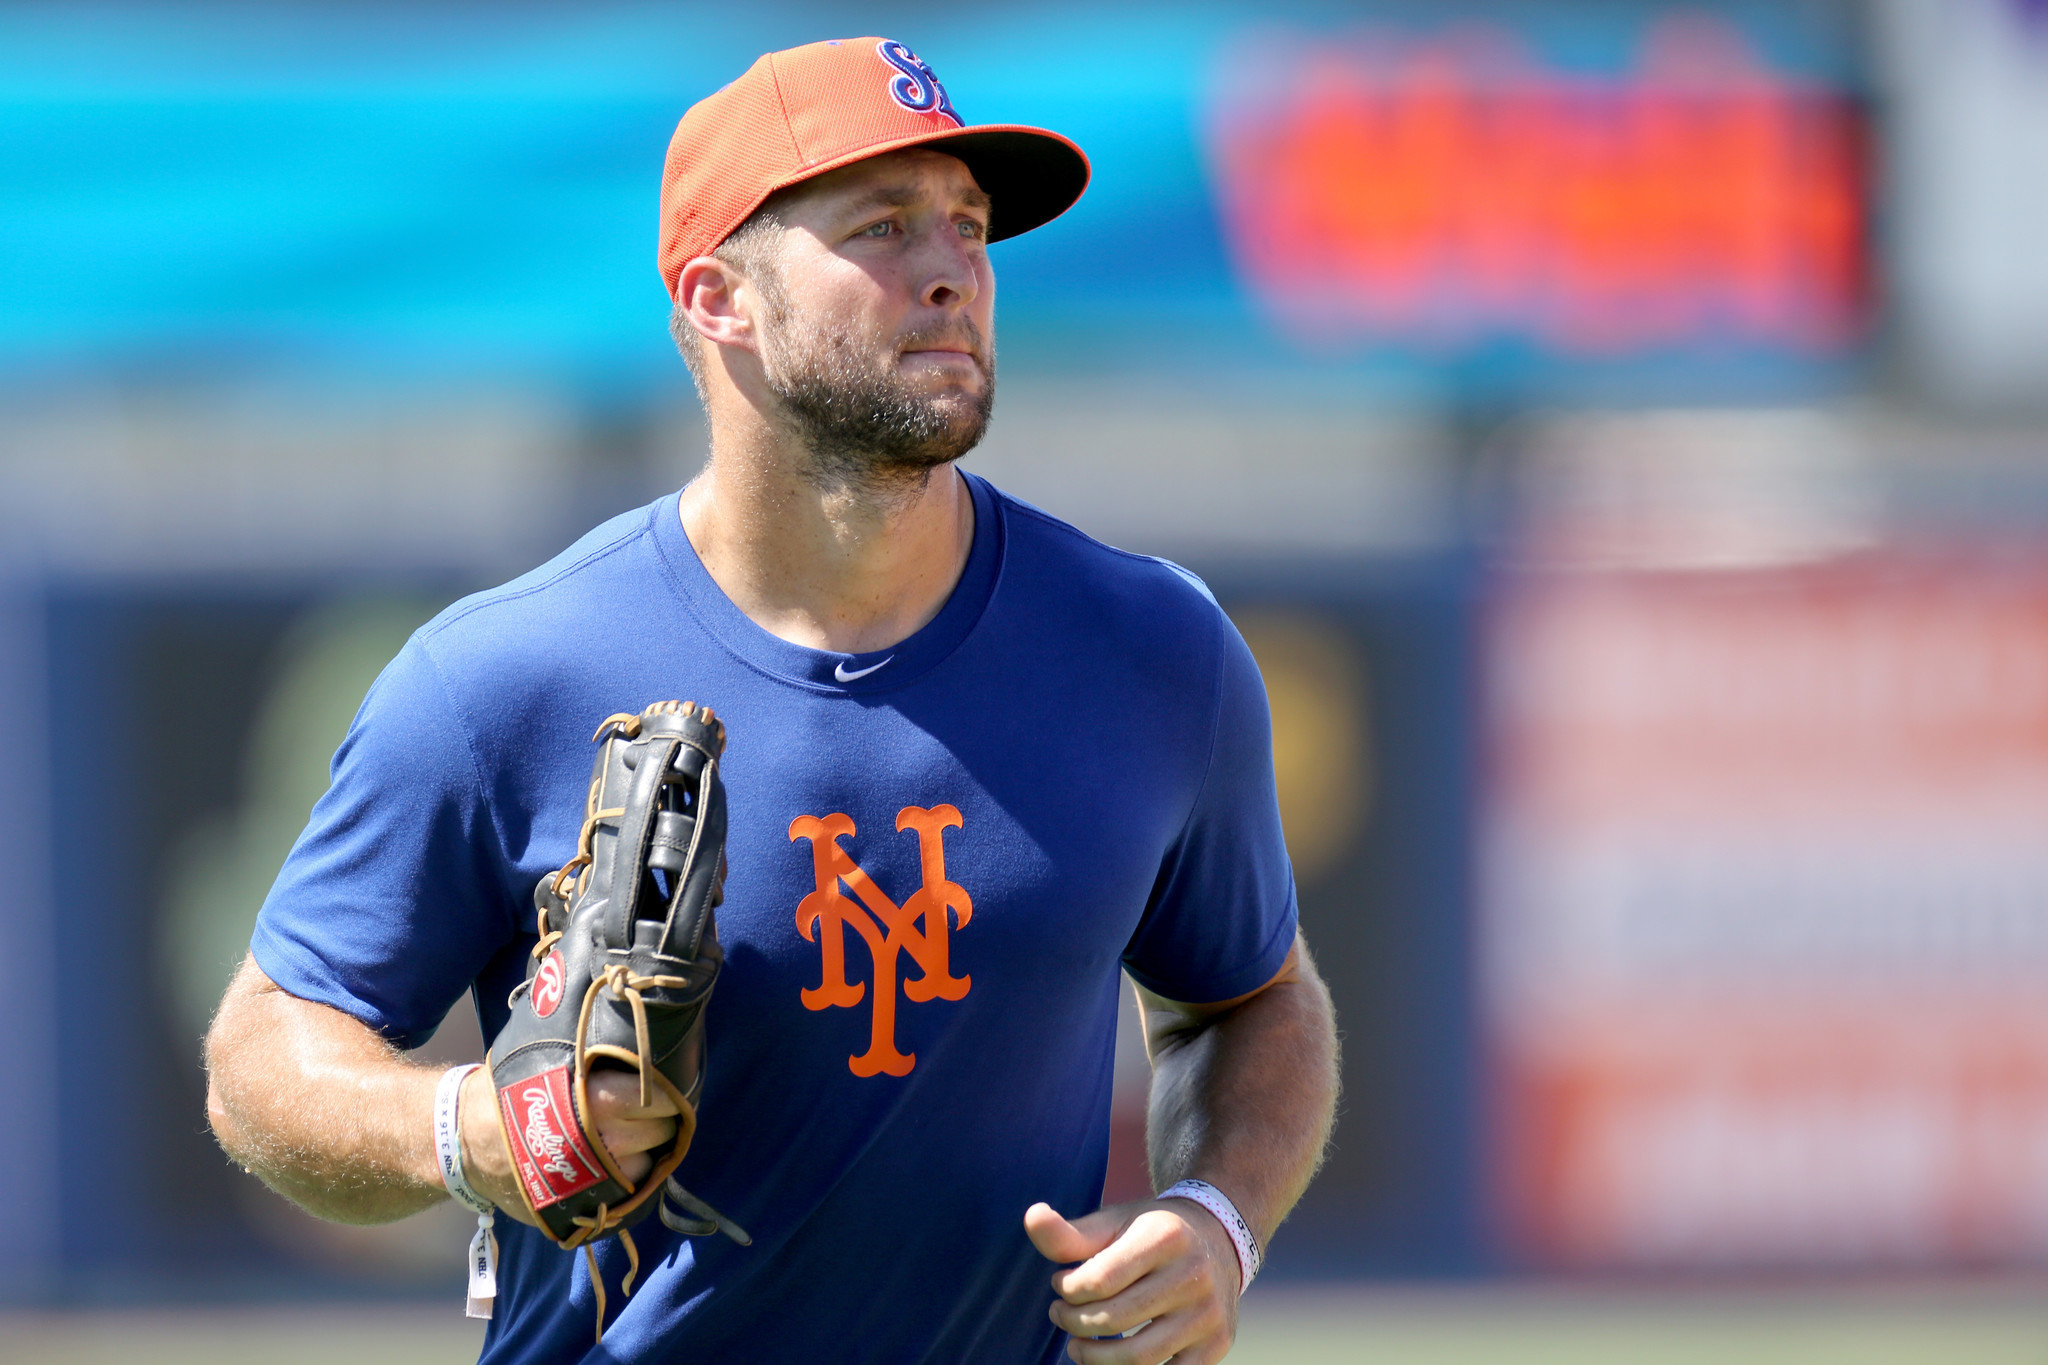 Tim Tebow has an 8-game hitting streak going for St. Lucie - Orlando Sentinel